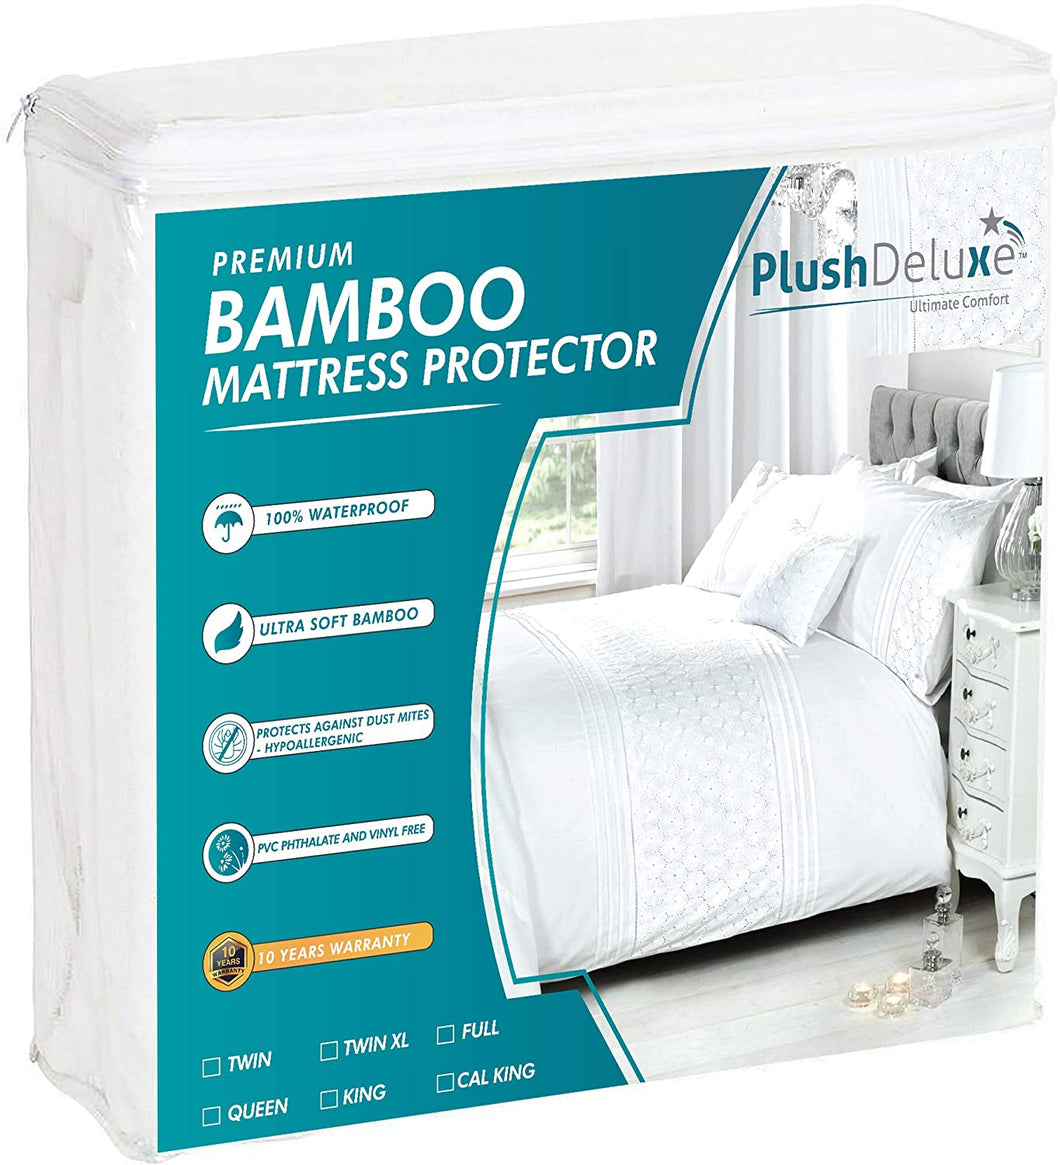 Why is everyone talking about a bamboo mattress?